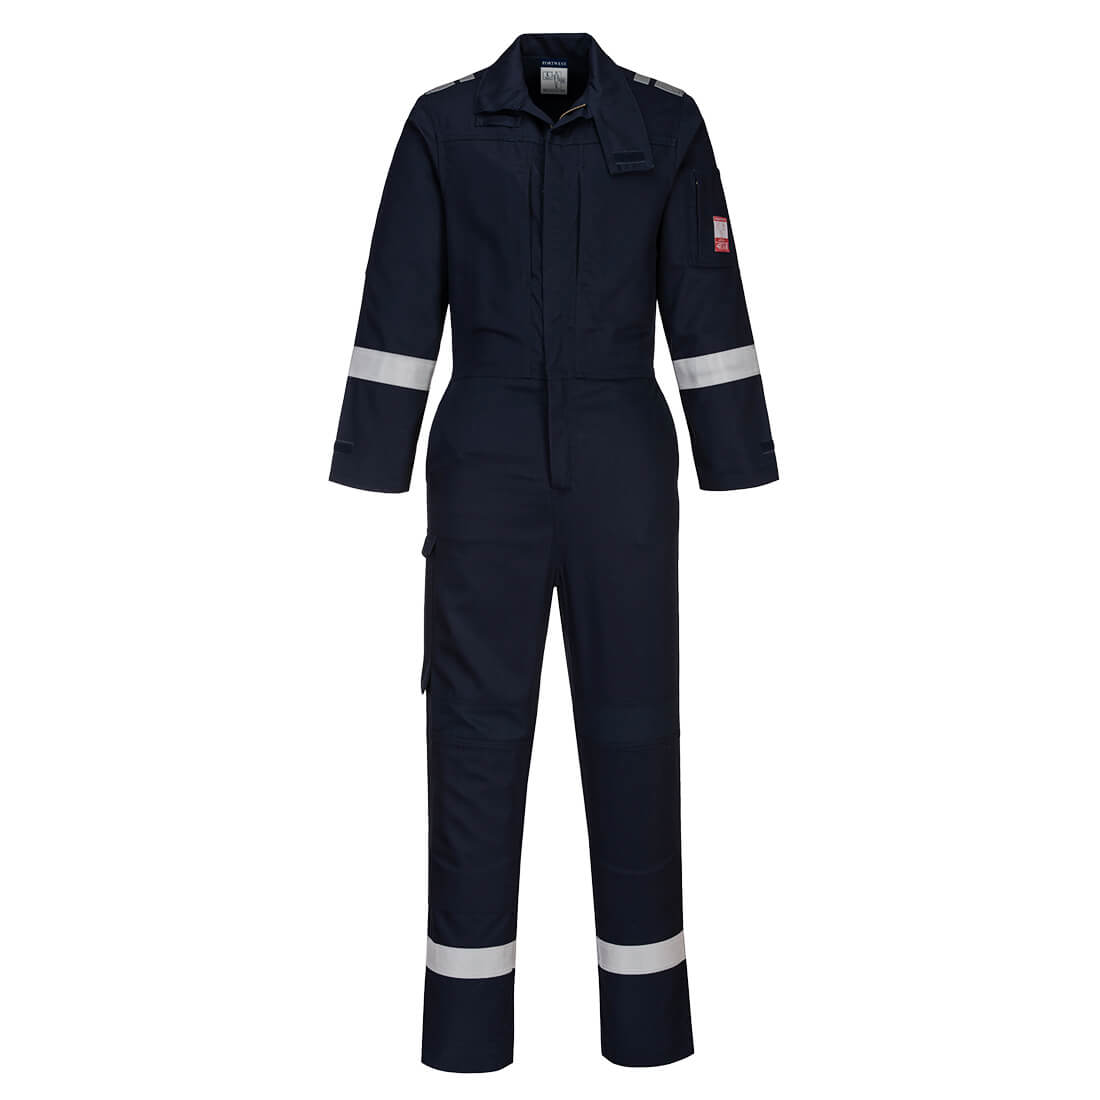 Work coveralls - Carret - Sioen - arc protection / fire-retardant /  chemical protection